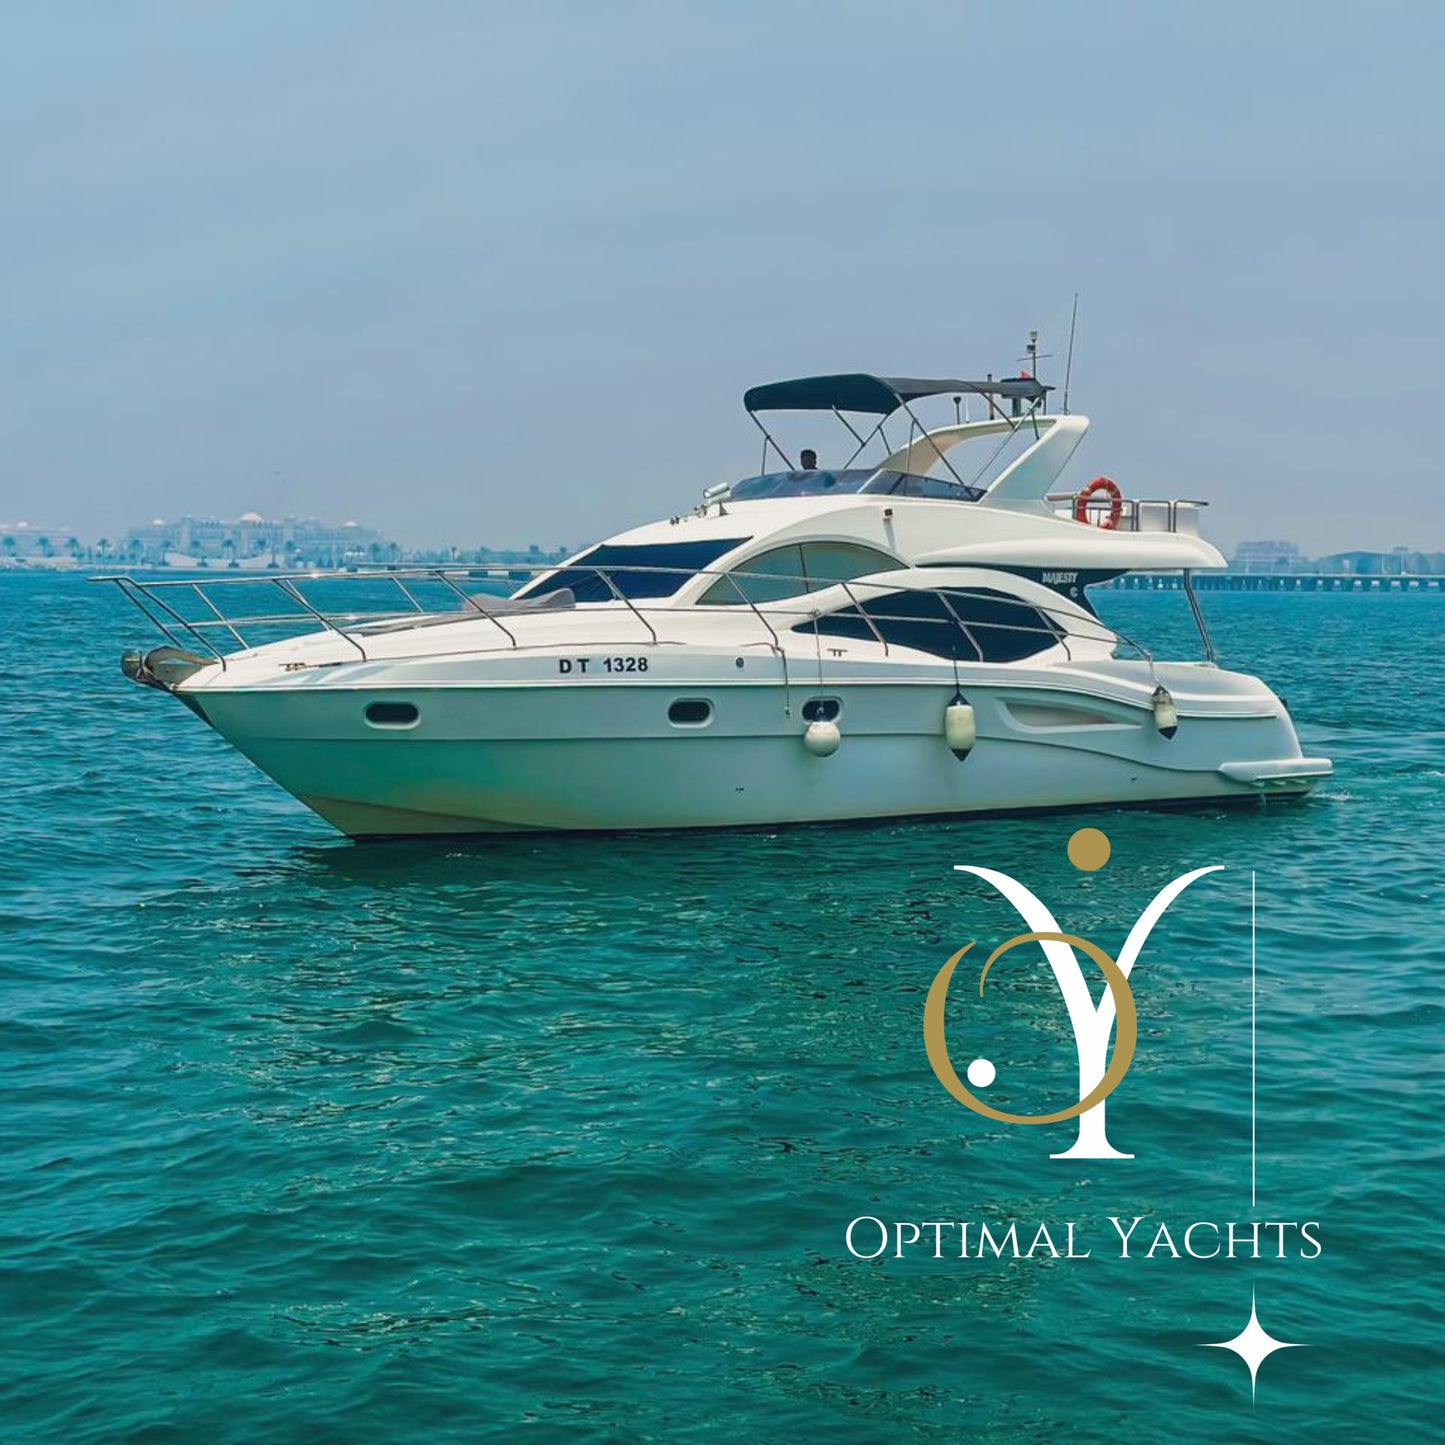 Luxury 3 Hour Yacht Cruise to JBR (Including Jet Skis)